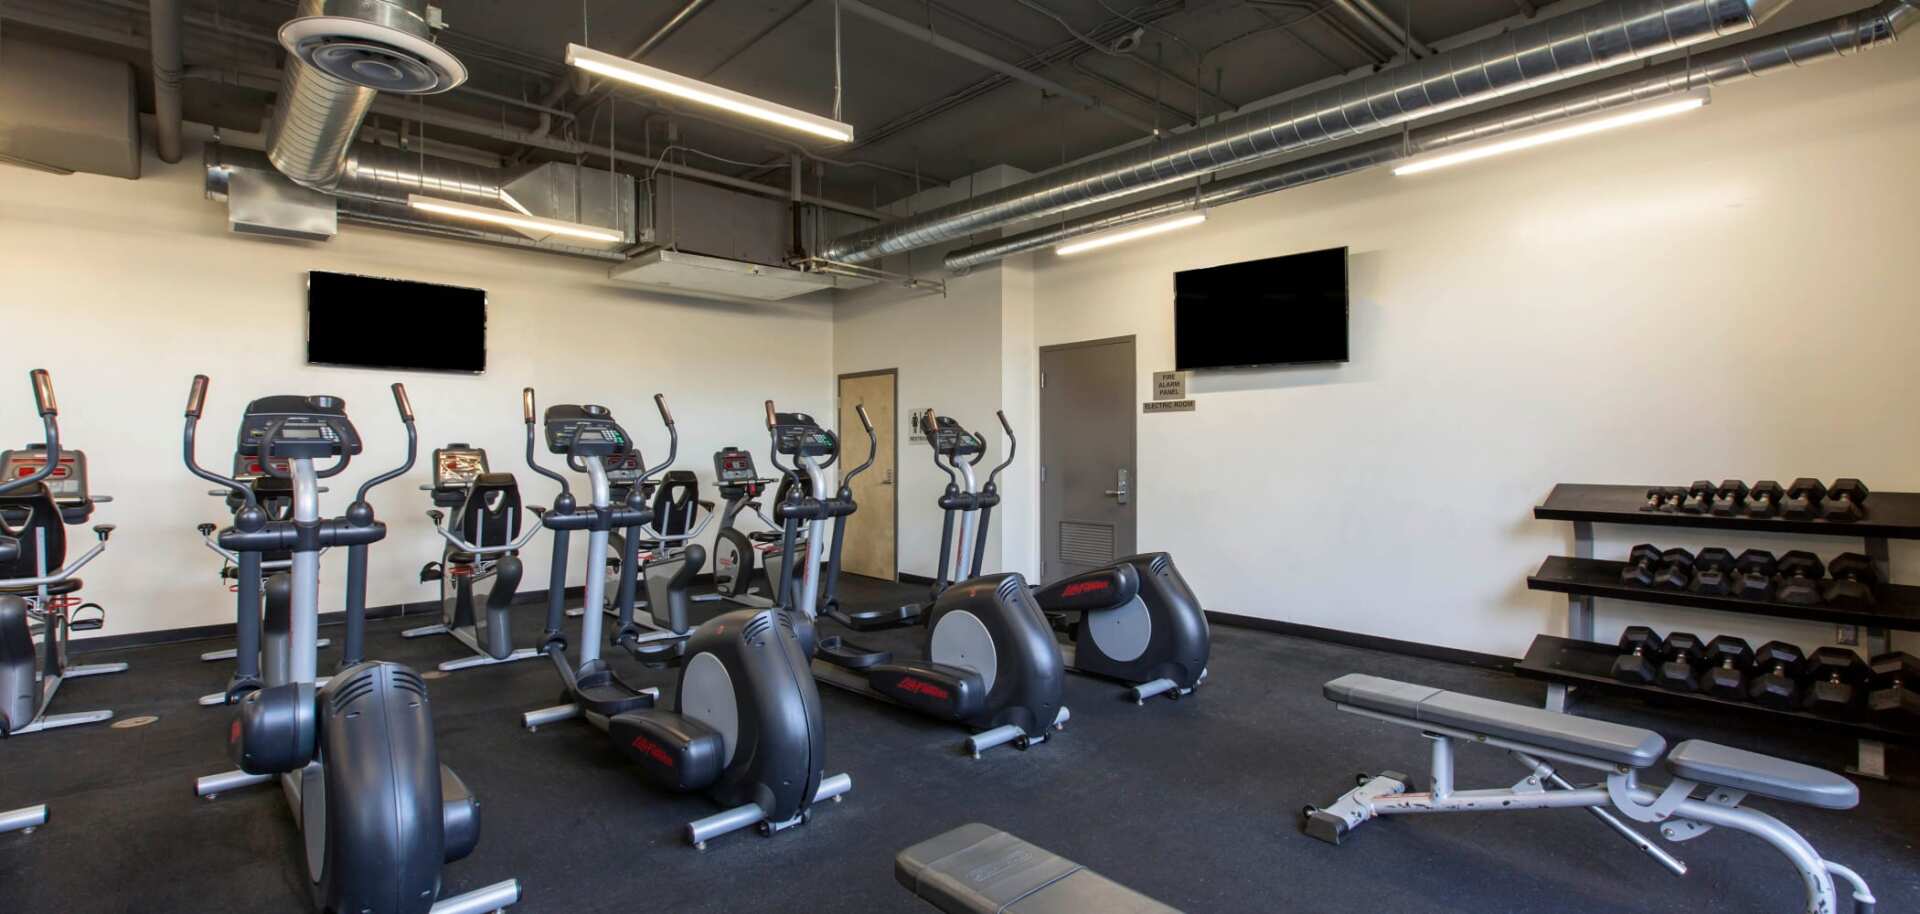 Fitness center at ICON.